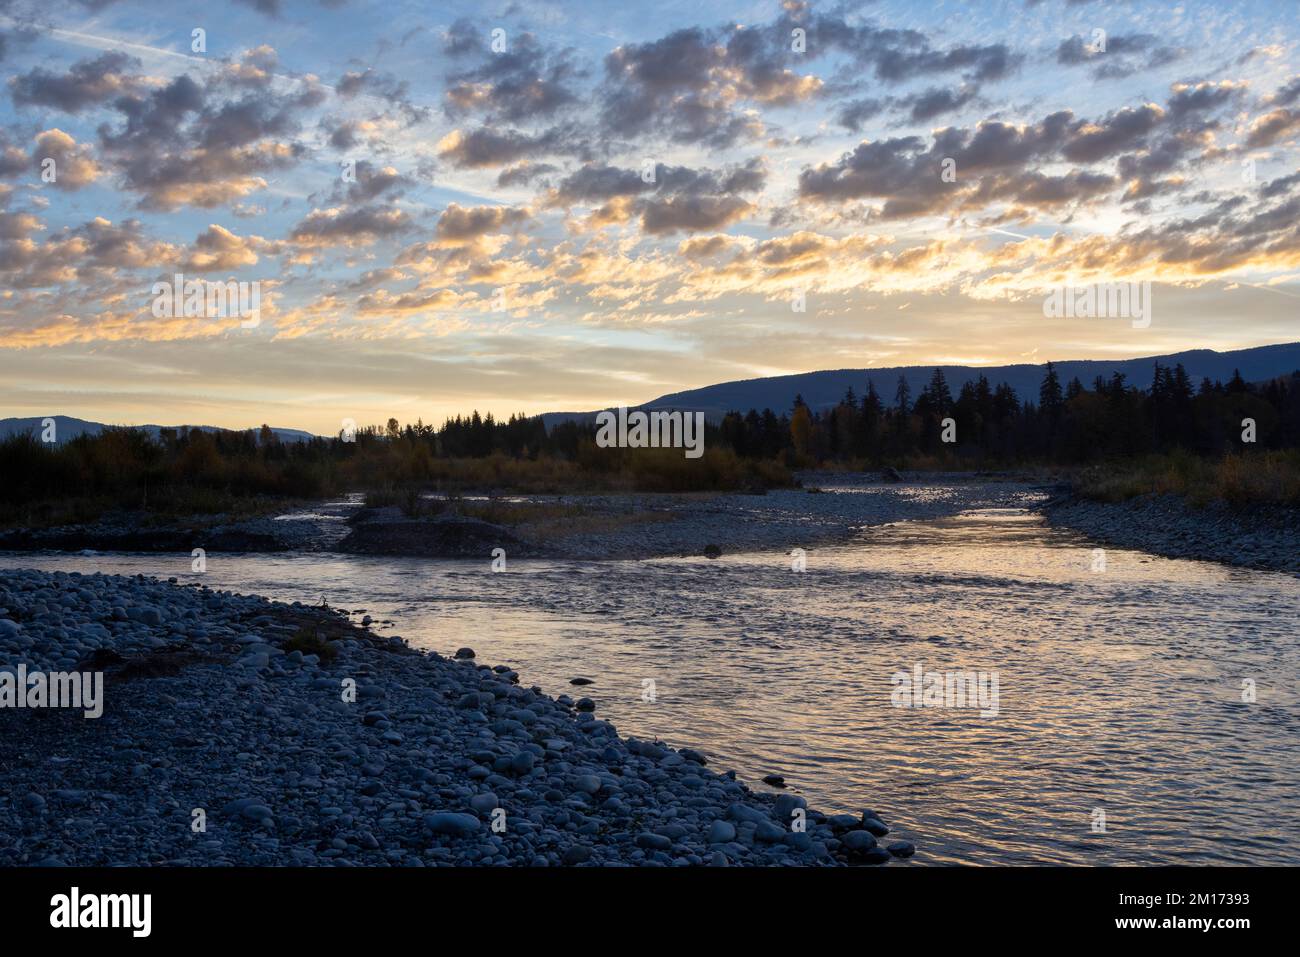 The Gros Ventre River winding through a braided network of river rocks below sunrise. Grand Teton National Park, Wyoming Stock Photo